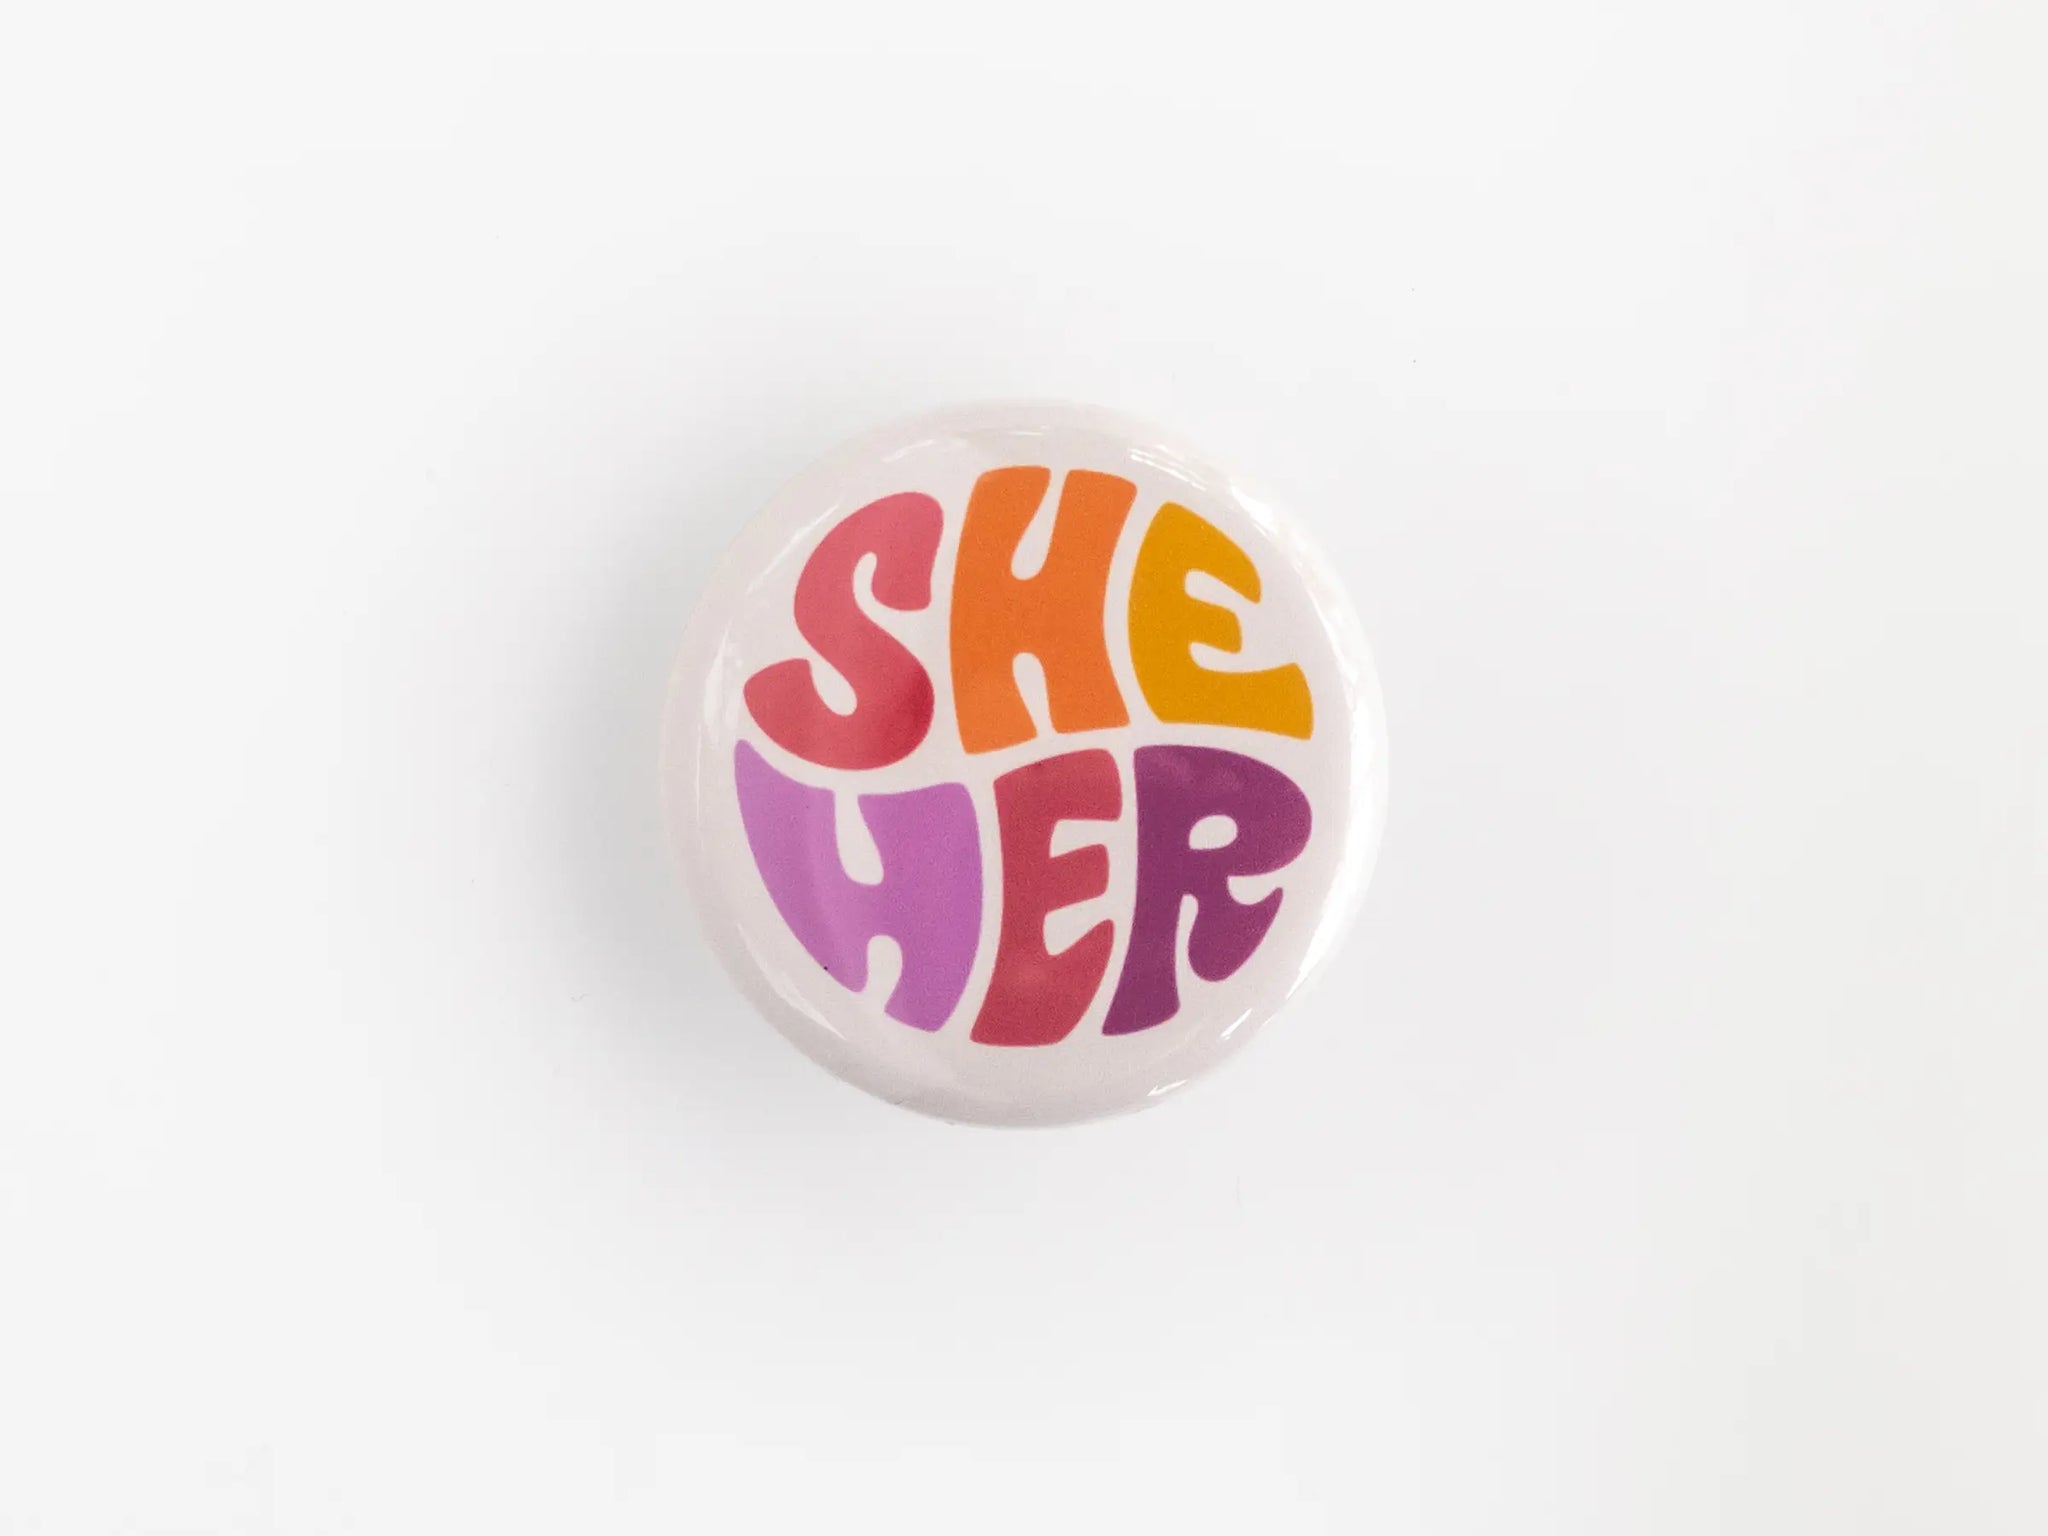 A 1.25” button with the pronouns “she” and “her” in multicolored lettering